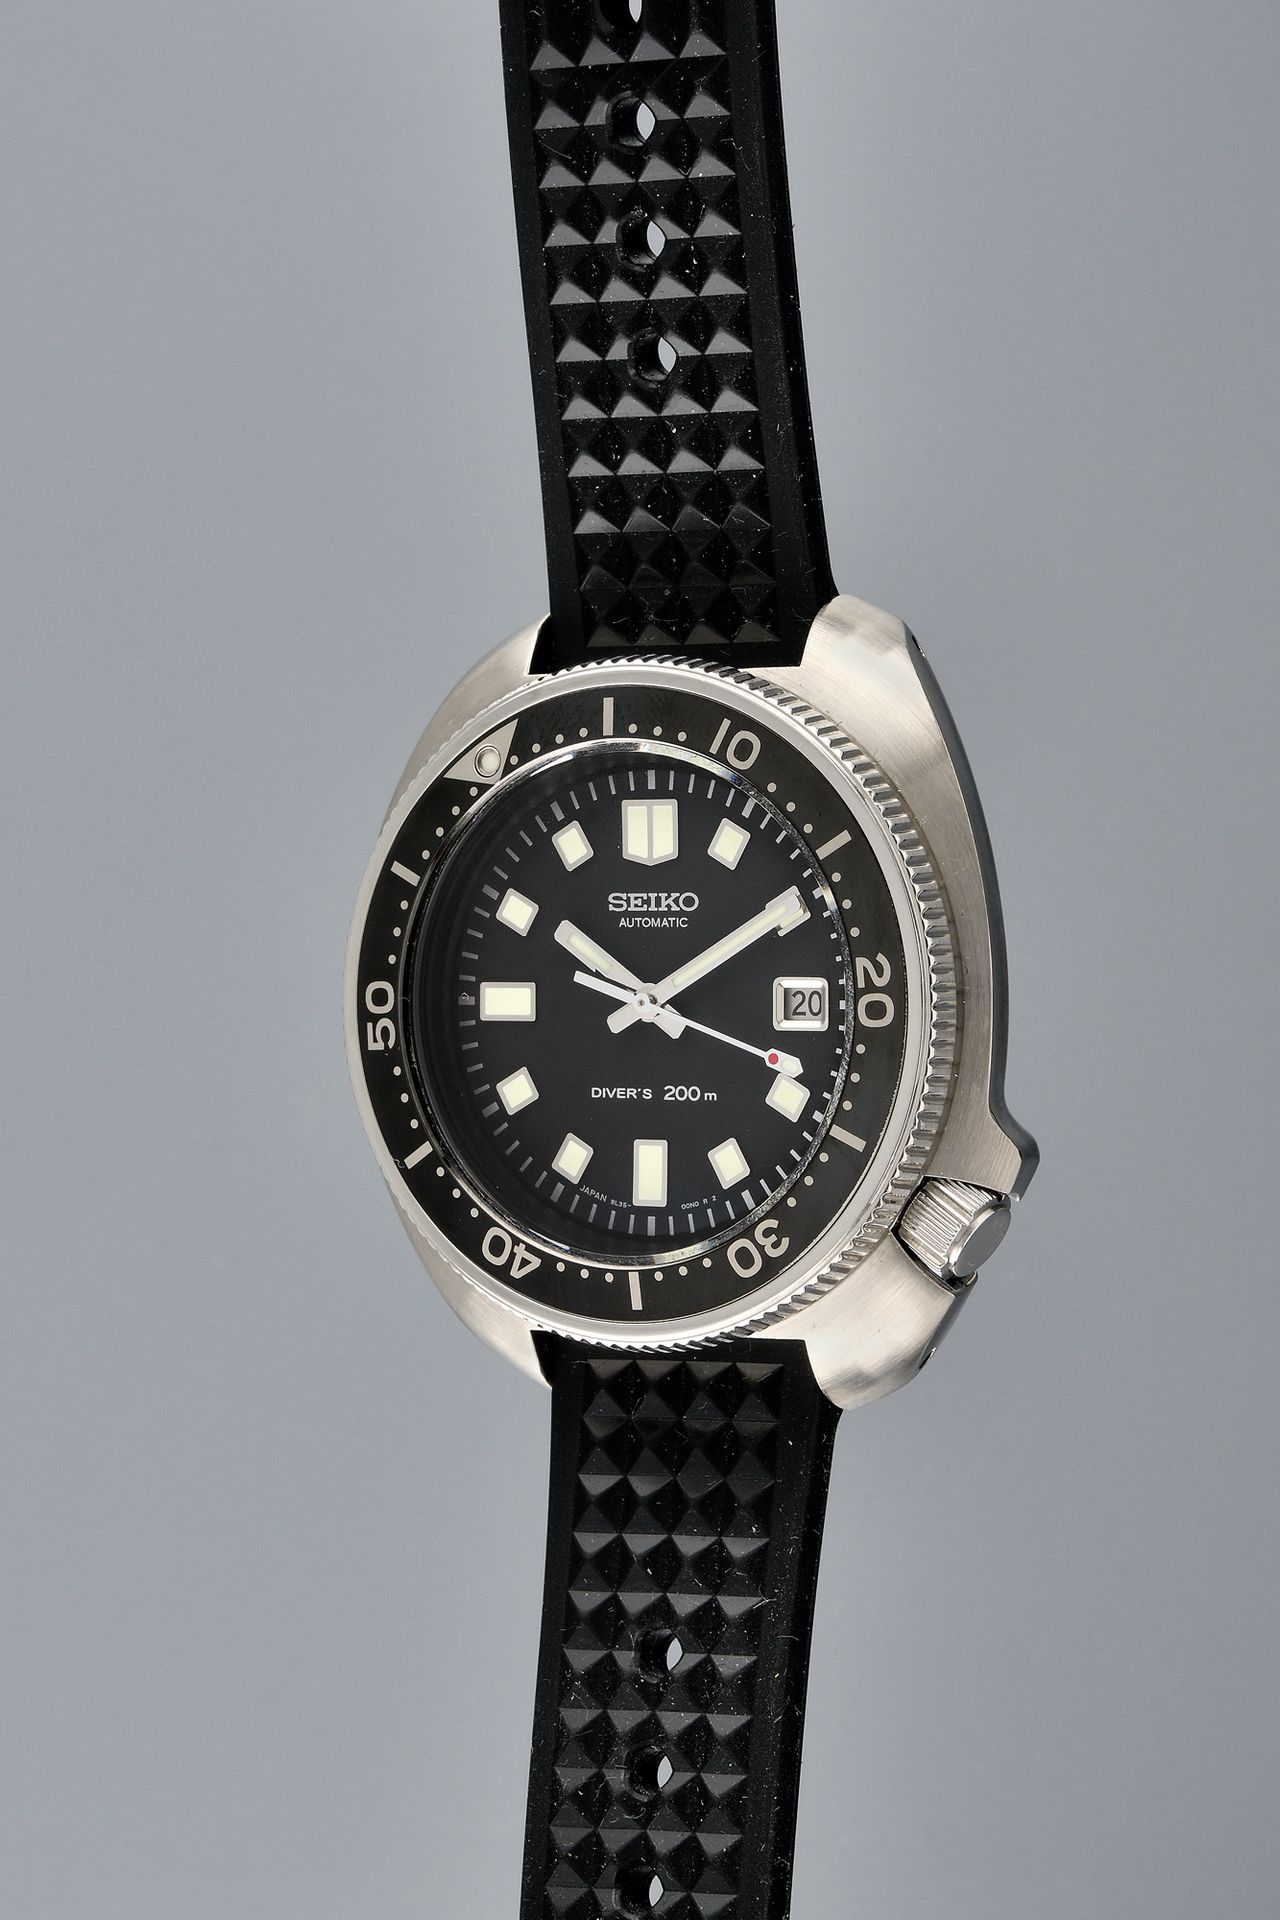 SEIKO PROSPEX LIMITED EDITION AROUND 2020. Ref: 8l35-00x0 N°1661/2500.  Men's diving watch type Sub, reissue of a very popular classic Seiko  turtle-shaped diver's watch (ref. 6105-8110) from the 1970's that was made